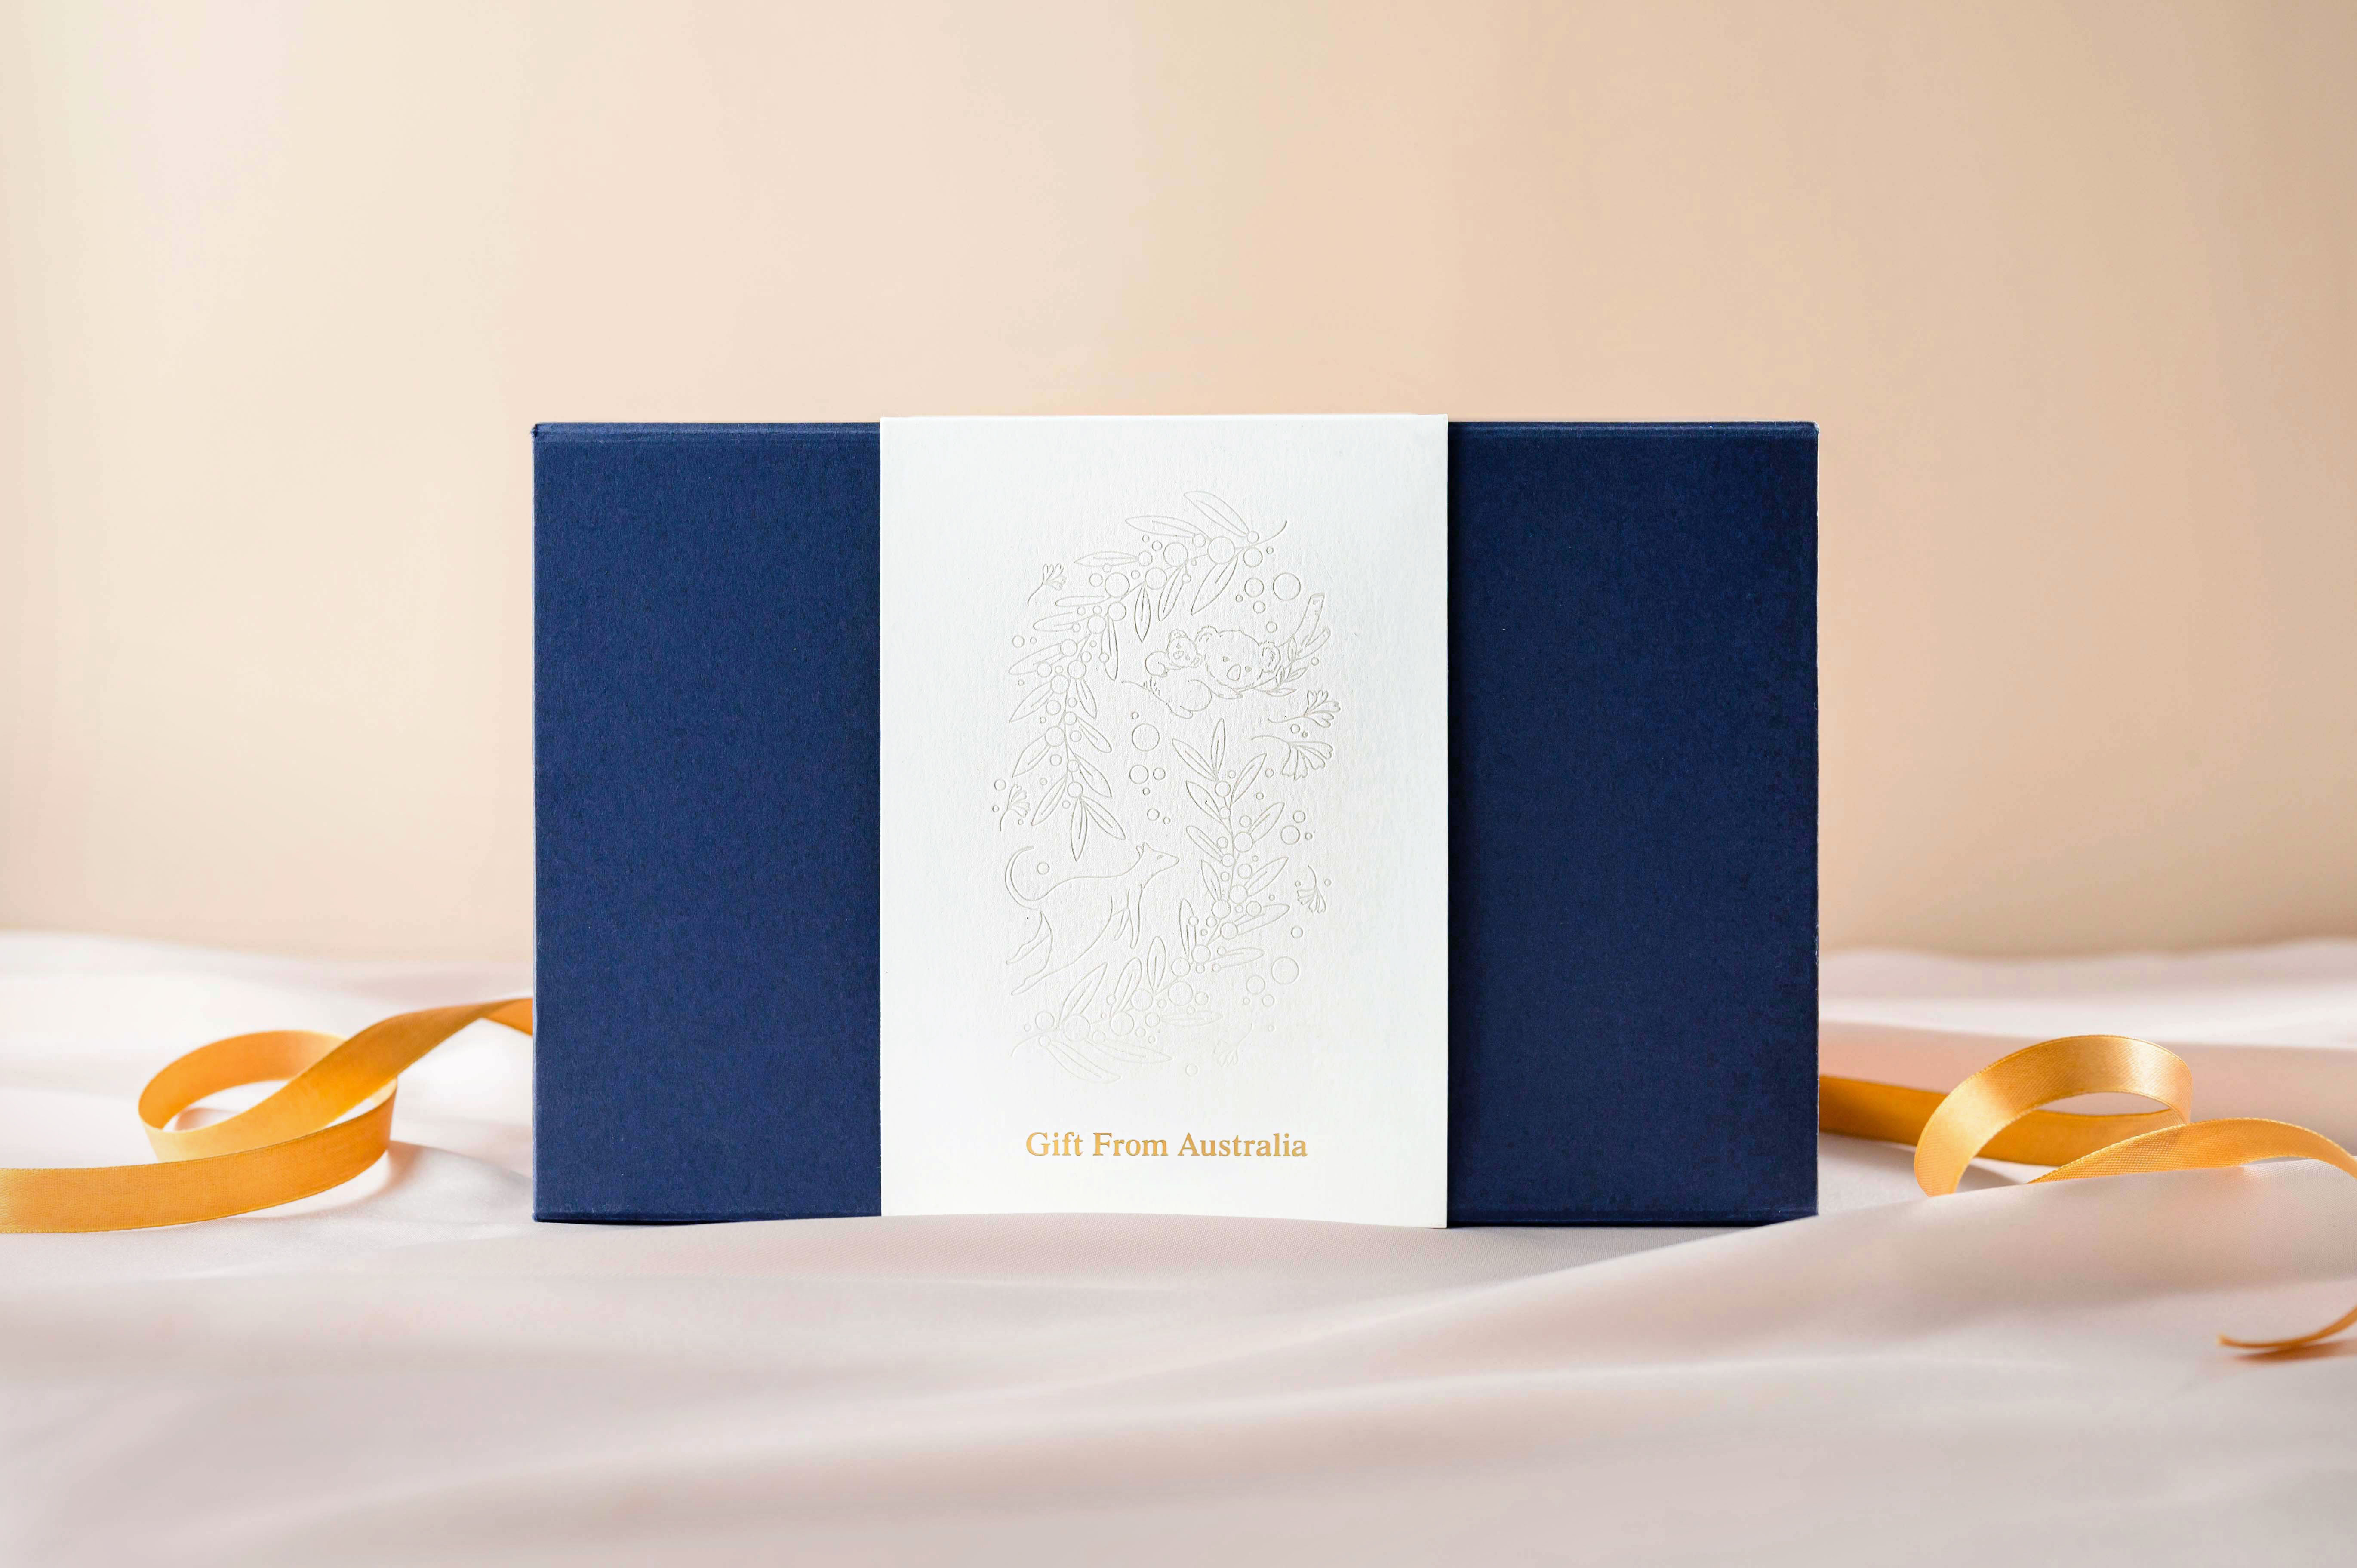 Packaging Design that Deliver Meaningful Gifts From Australia to China